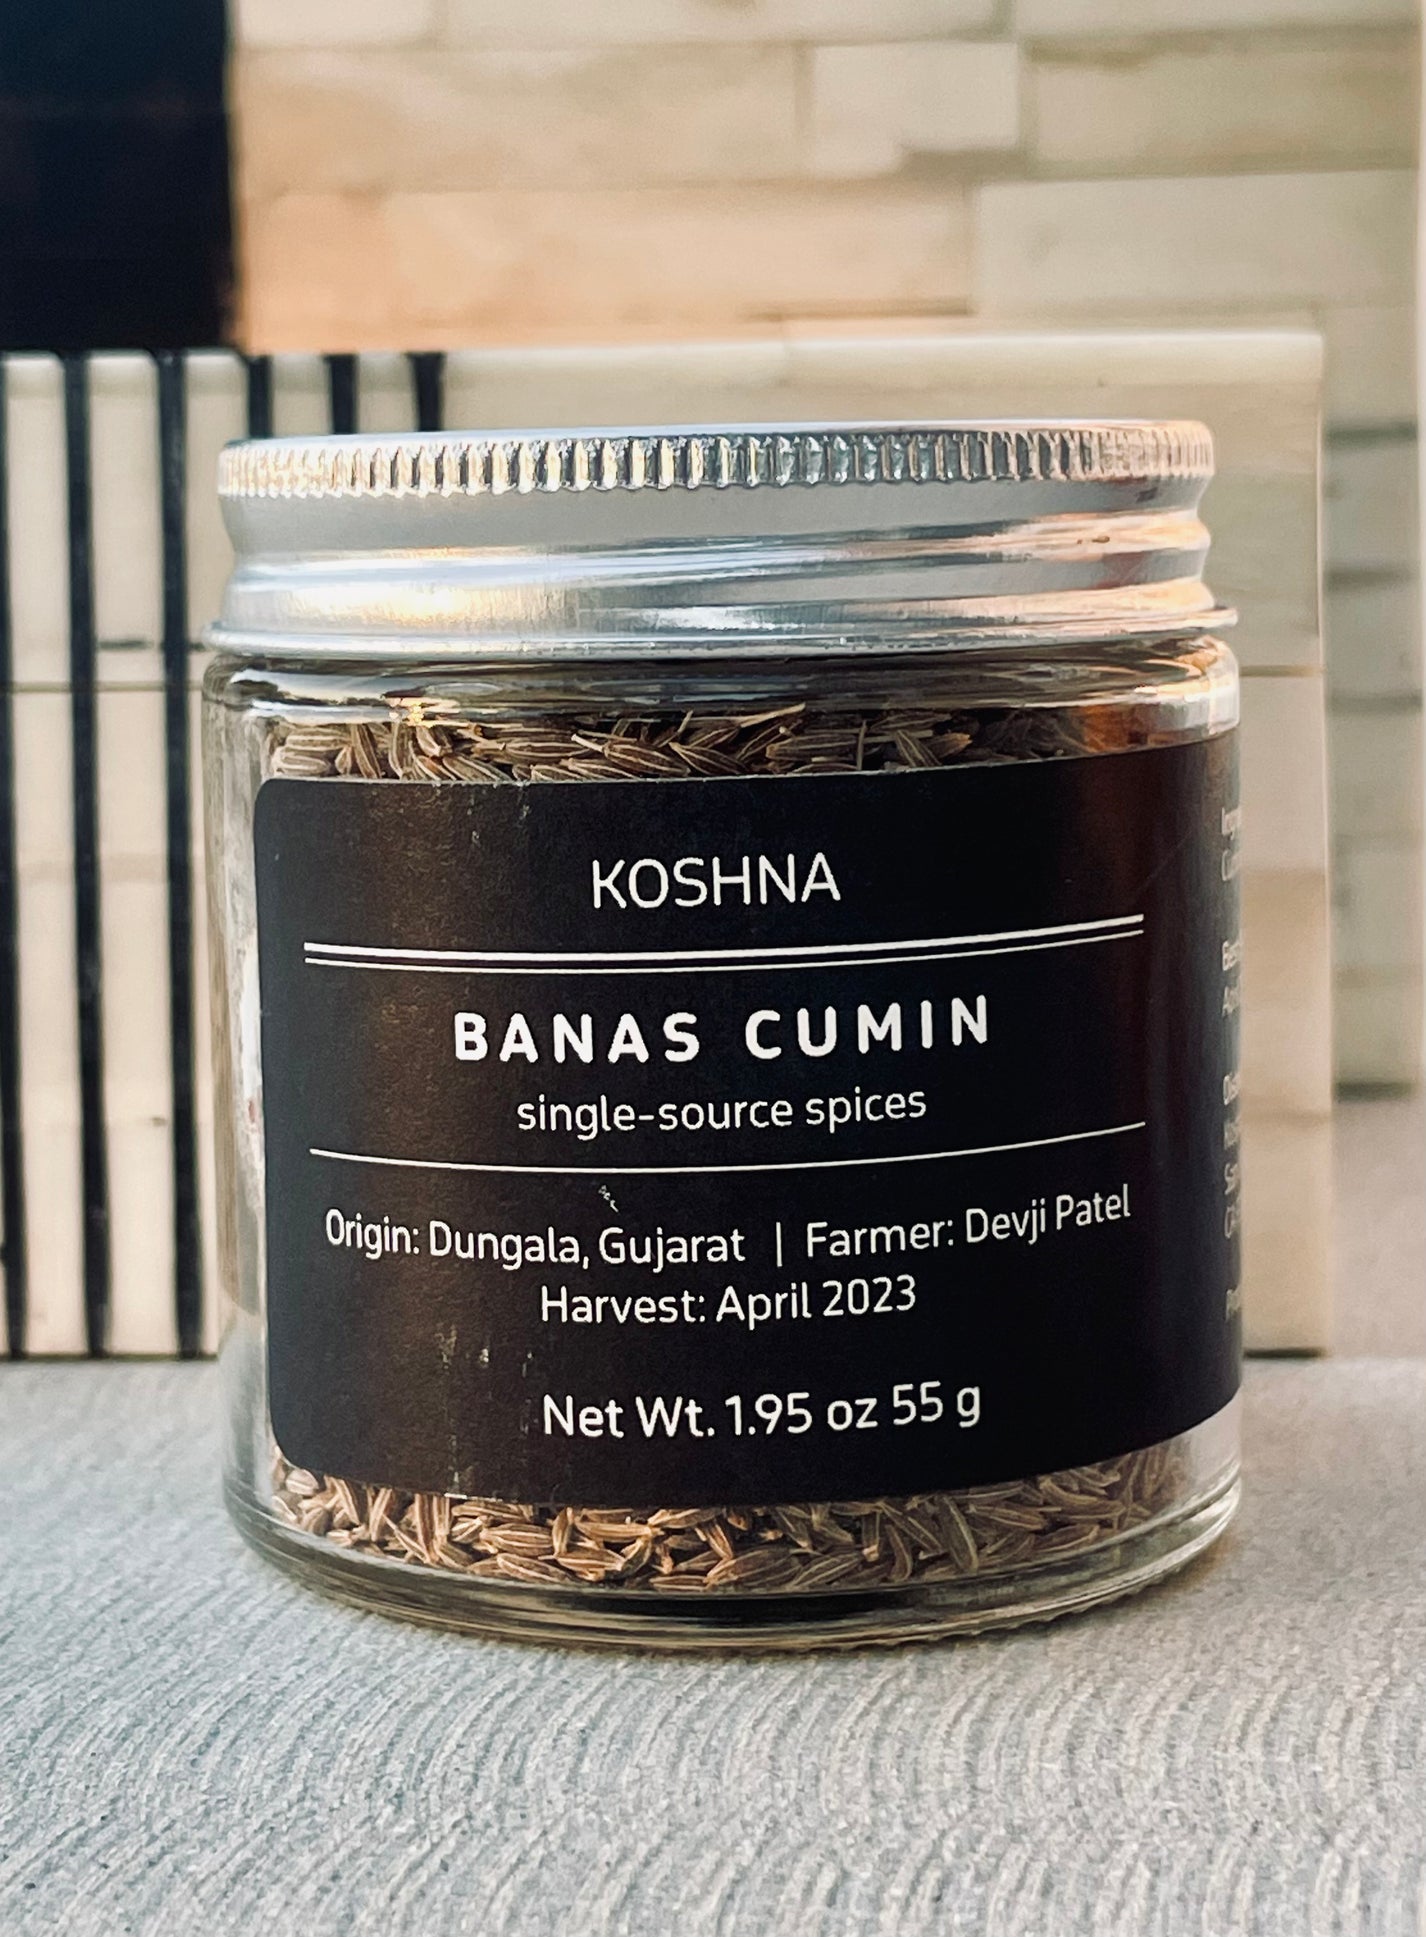 Koshna's Cumin is complex, has robust earthy and nutty fragrance. It leaves a lingering taste on the palate with bold, smoky and herby characteristics.